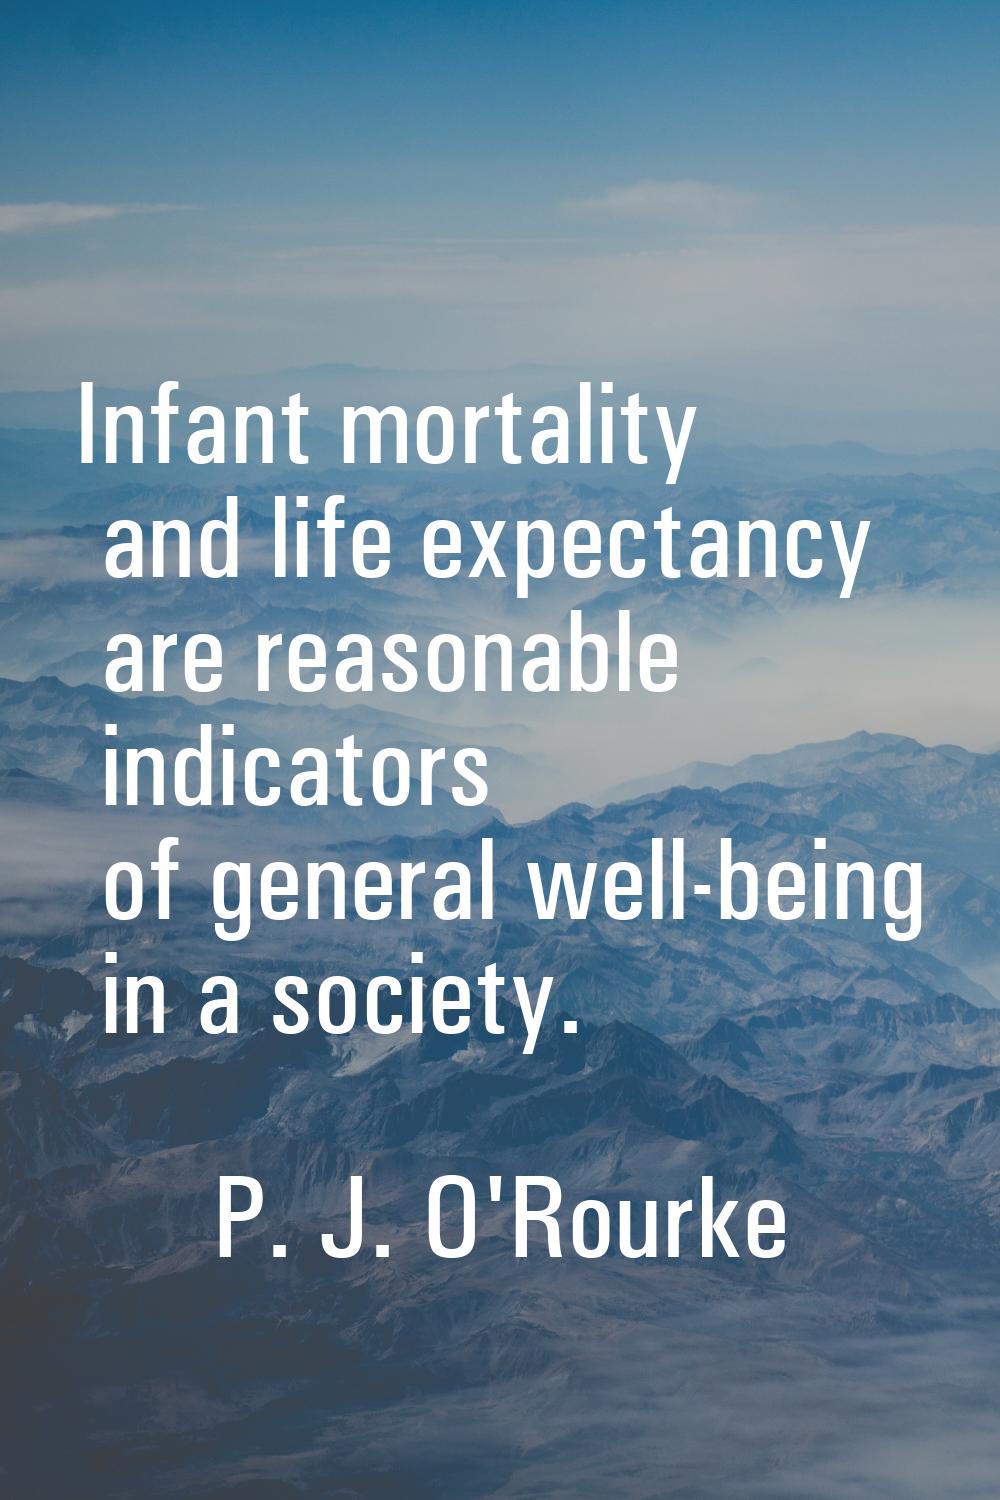 Infant mortality and life expectancy are reasonable indicators of general well-being in a society.